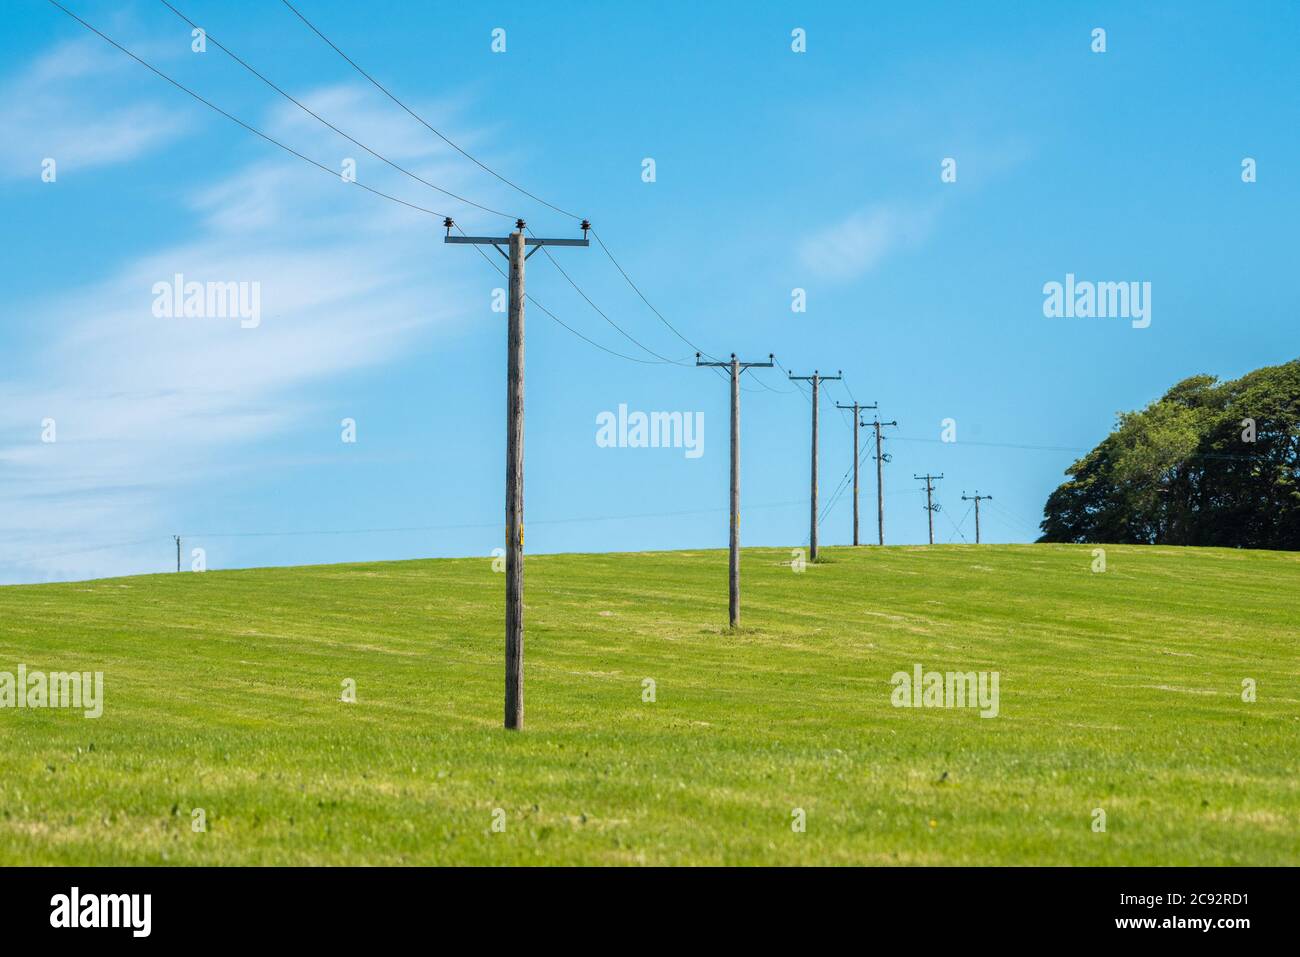 Electricity poles in a grass field, Chipping, Preston, Lancashire, UK Stock Photo